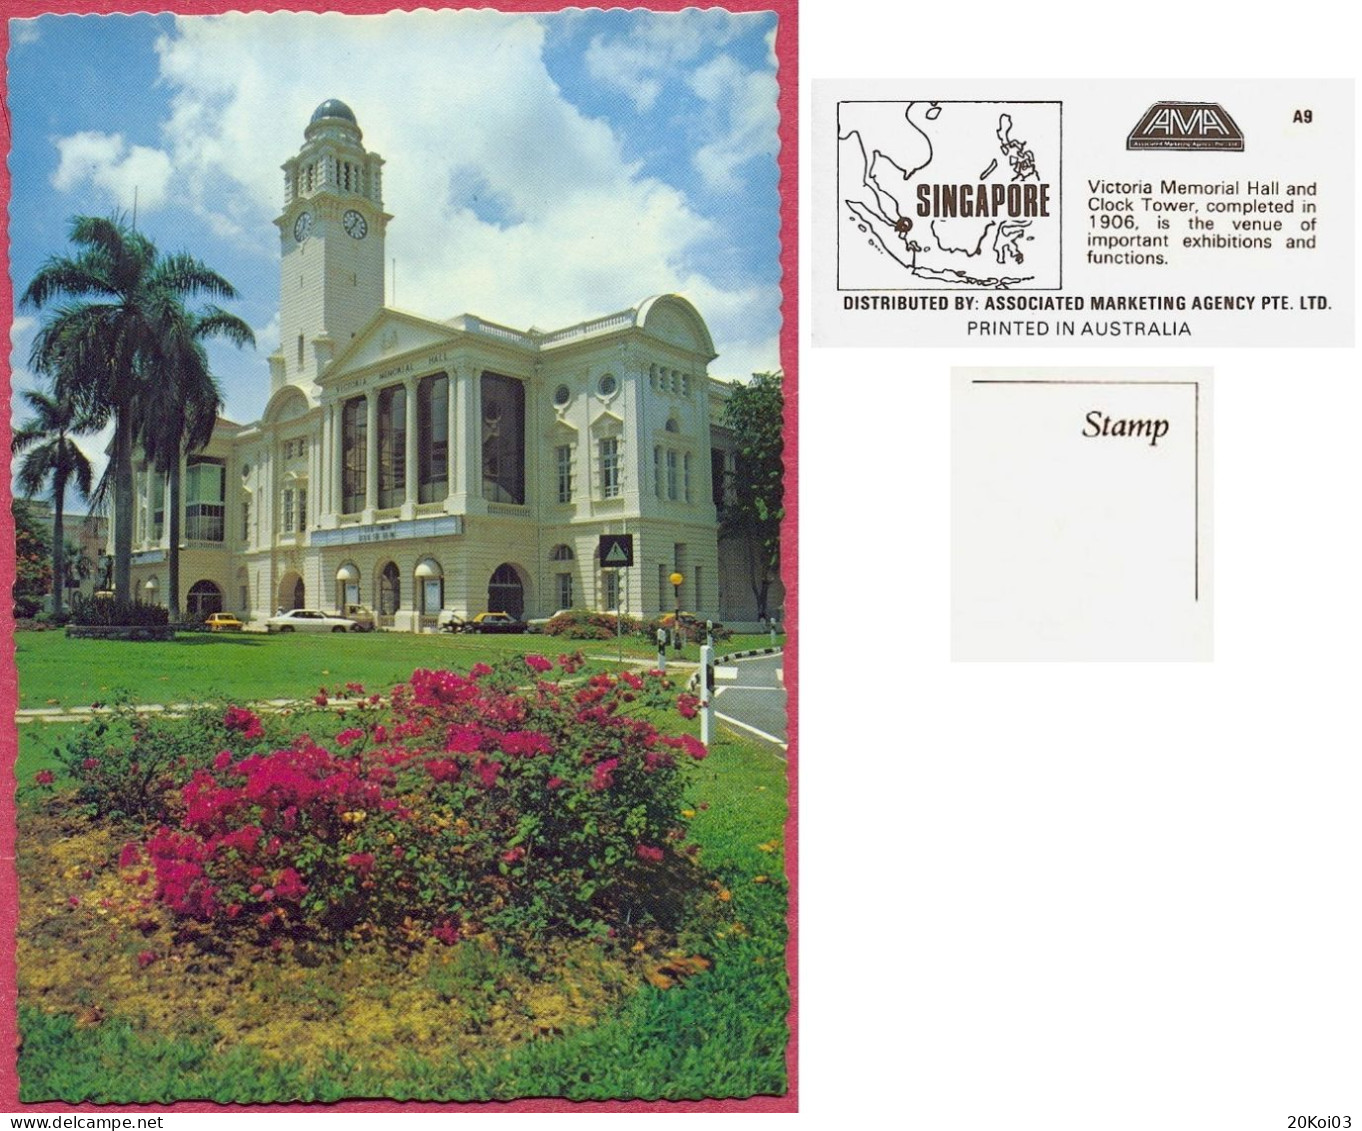 Singapore Victoria Memorial Hall, And Clock Tower Completed 1906, +/-1975's A9 AMA , Vintage UNC_cpc - Singapore